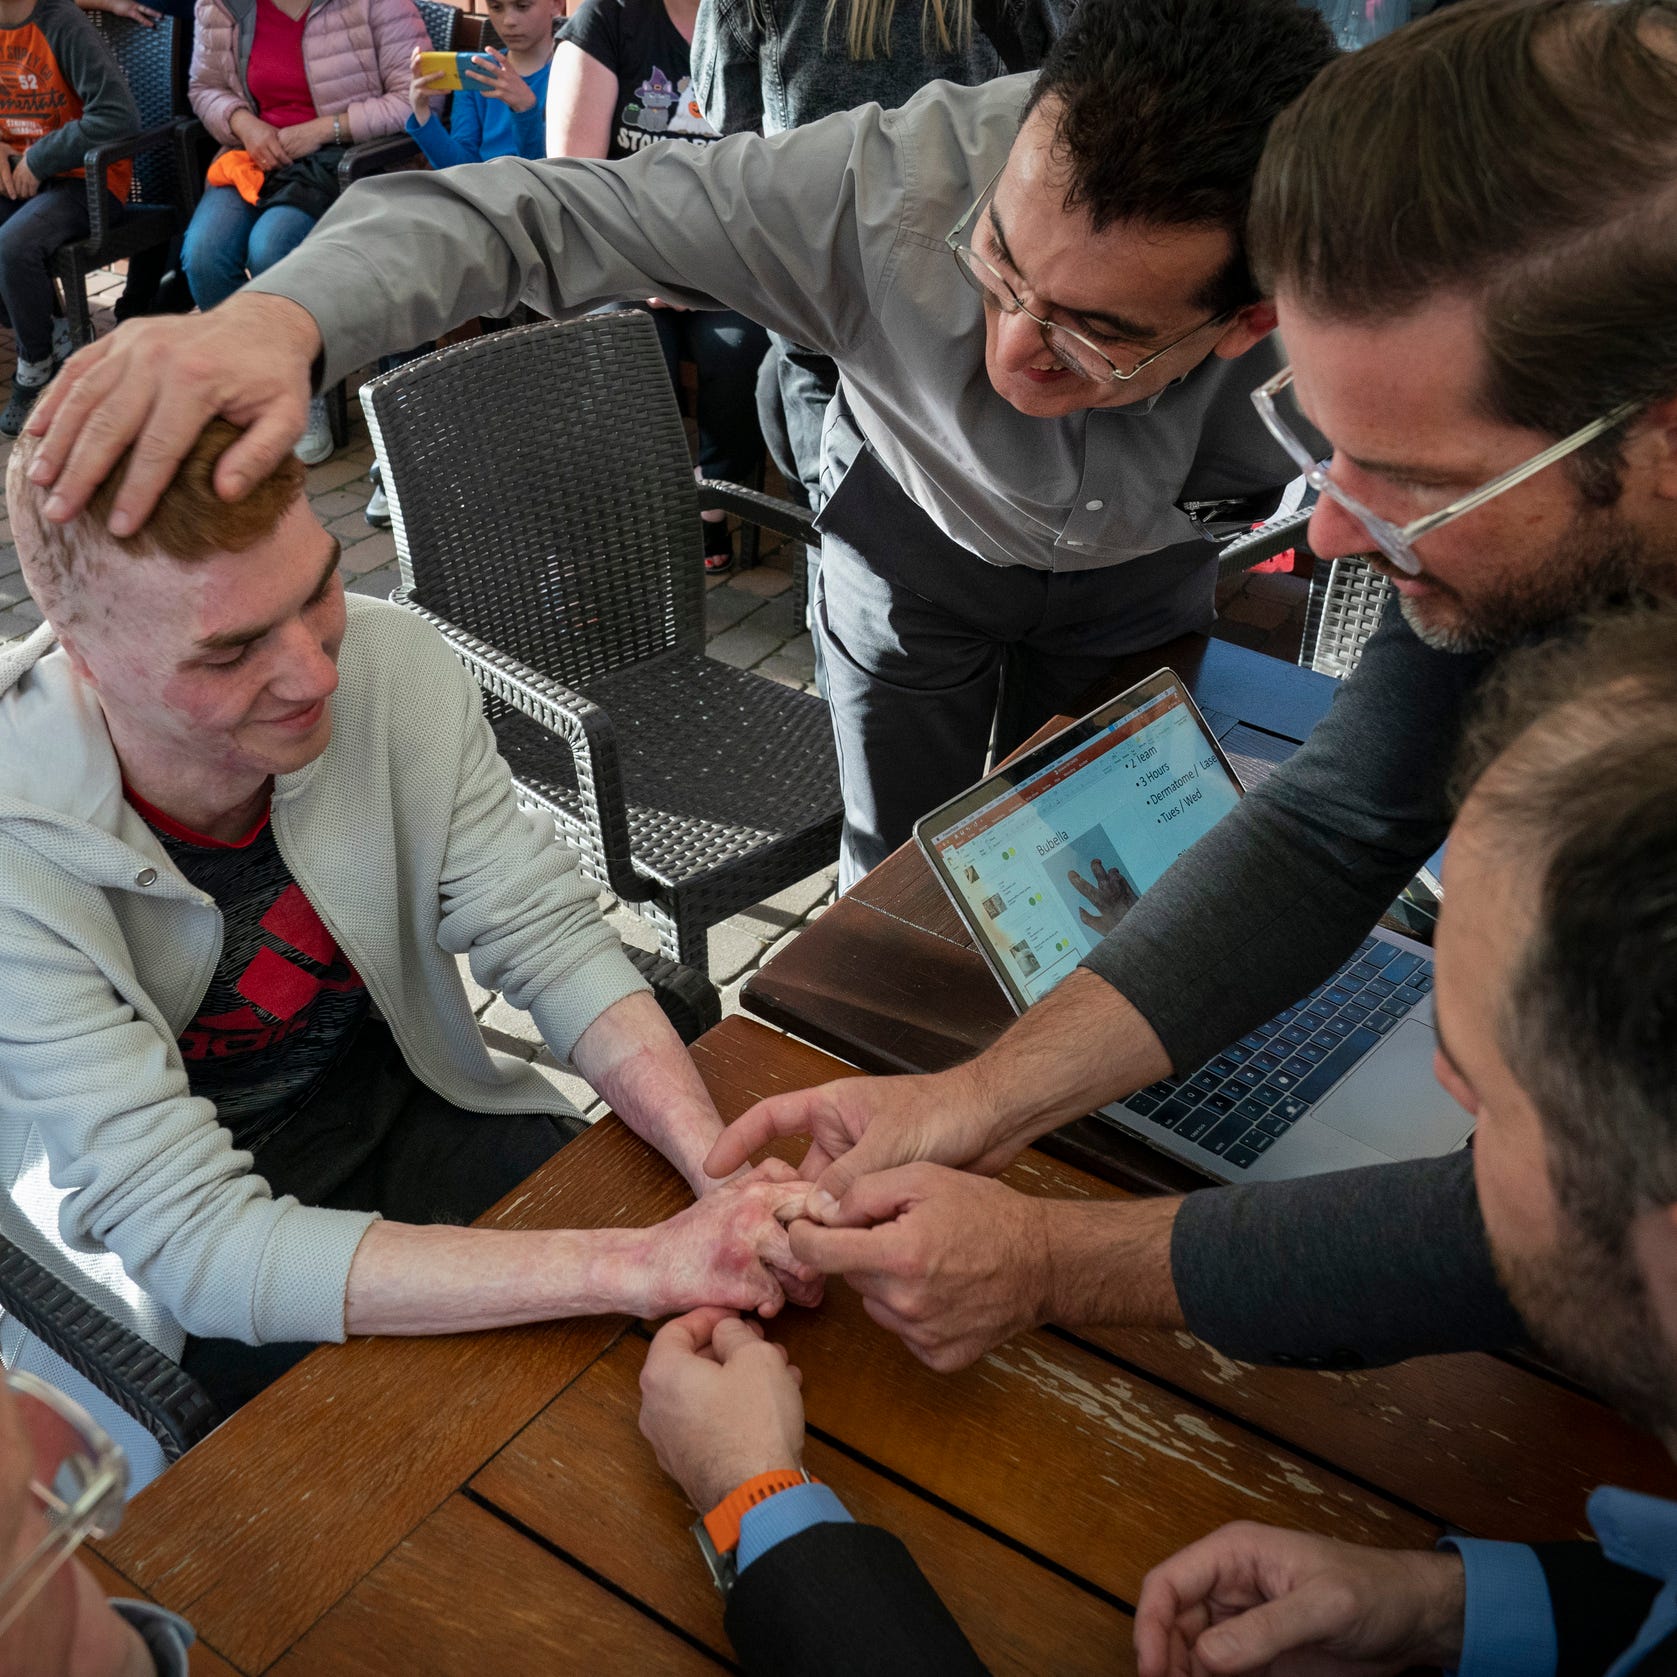 Dr. David Brown, a plastic surgeon from the University of Michigan, left, helps to screen Volodymyr Bubela, 17, of Lviv, Ukraine Sunday, May 14, 2023 on a hotel patio in Leczna, Poland. Brown was joined with Doctors Collaborating to Help Children Founder Dr. Gennadiy Fuzaylov, Dr. Shawn Diamond an Assistant Professor of Plastic Surgery at Texas Tech in El Paso and Dr. Brian Kelley, a plastic surgeon at the University of Texas at Austin Dell Medical School. Bubela was severely burned at the age of 7 in a barn fire and   will have his hands operated on.  